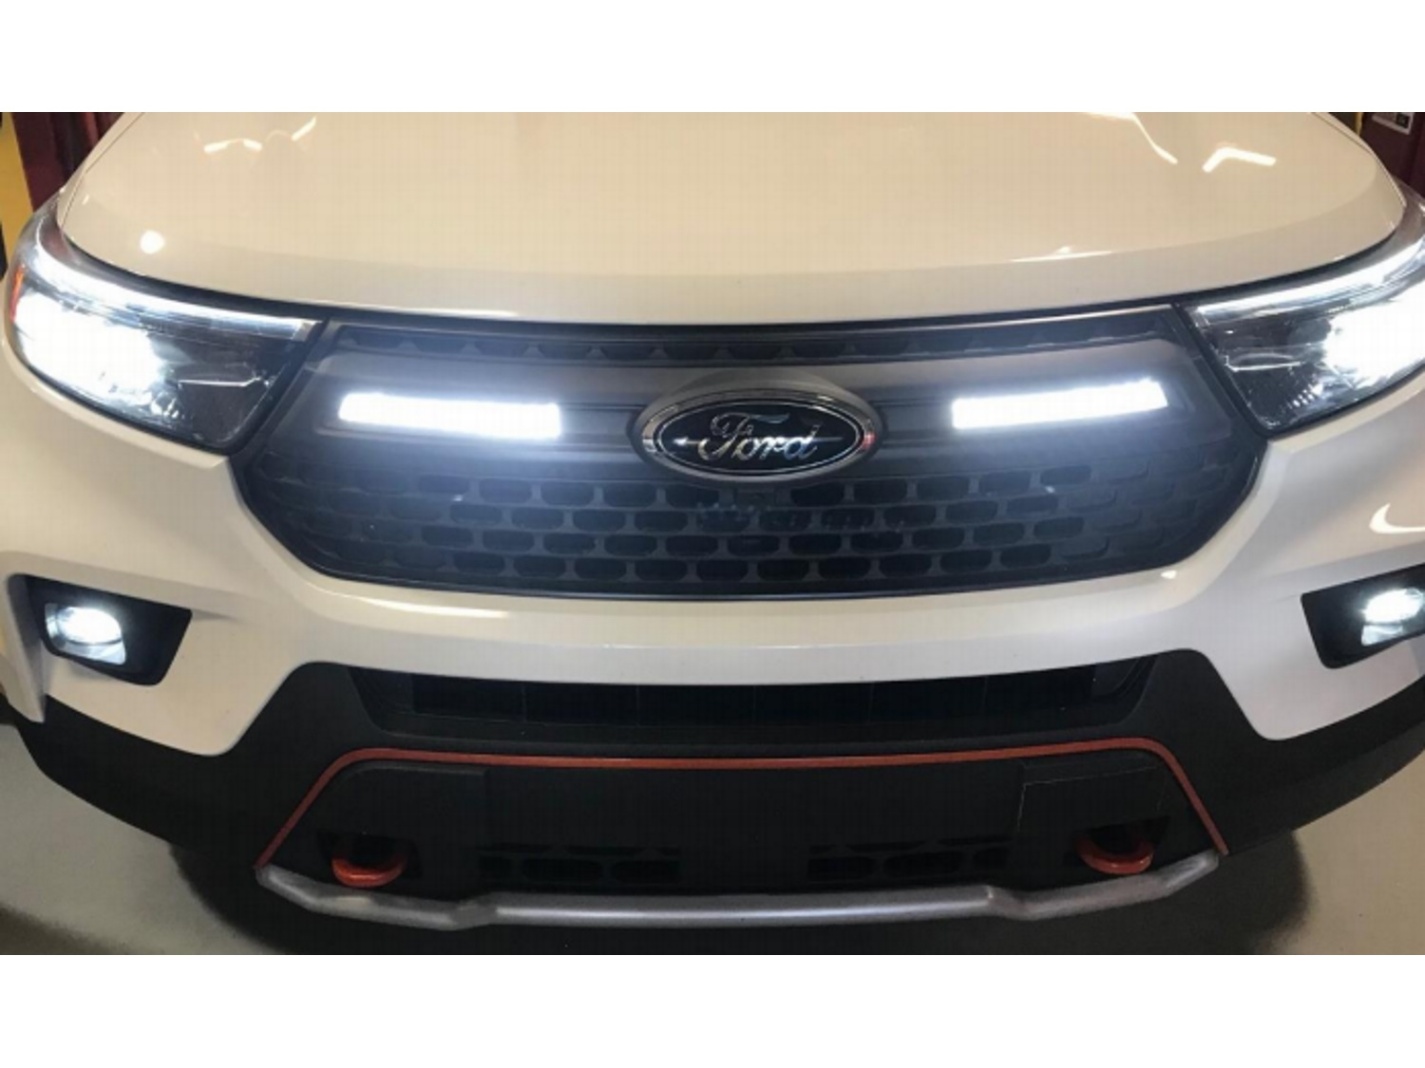 2021 ford explorer accessories Bulan 1  Ford Explorer - Performance Parts & Accessories  Levittown Ford